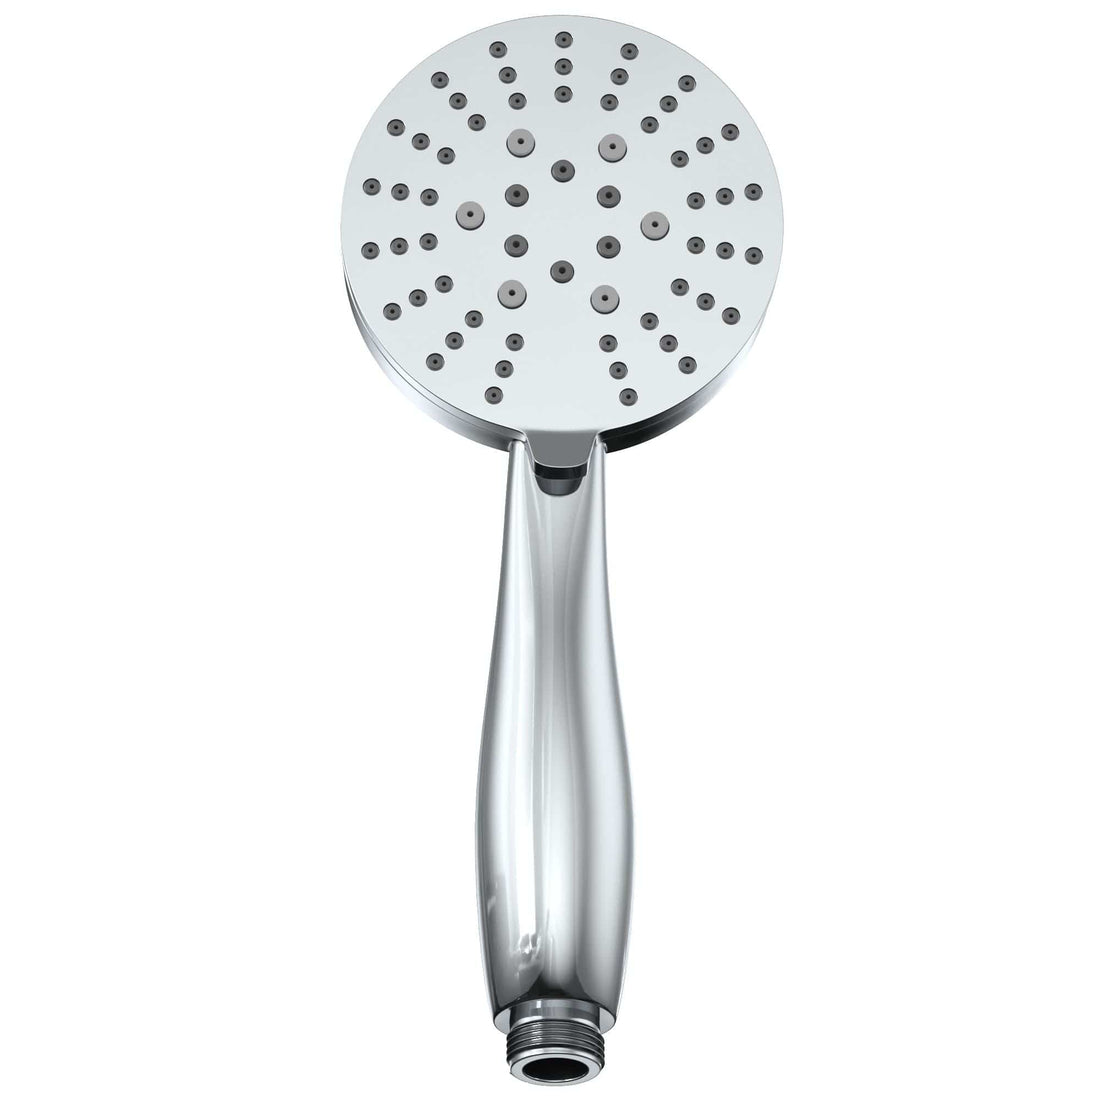 (Main Chrome) All Metal 3 Spray Handheld Shower Head, 4 Inch Spray Wand, No Flow Restrictor Made from 304 Stainless Steel with Silicone Nozzles Works With All Hoses, Slide Bars & Wall Mount Holders - The Shower Head Store